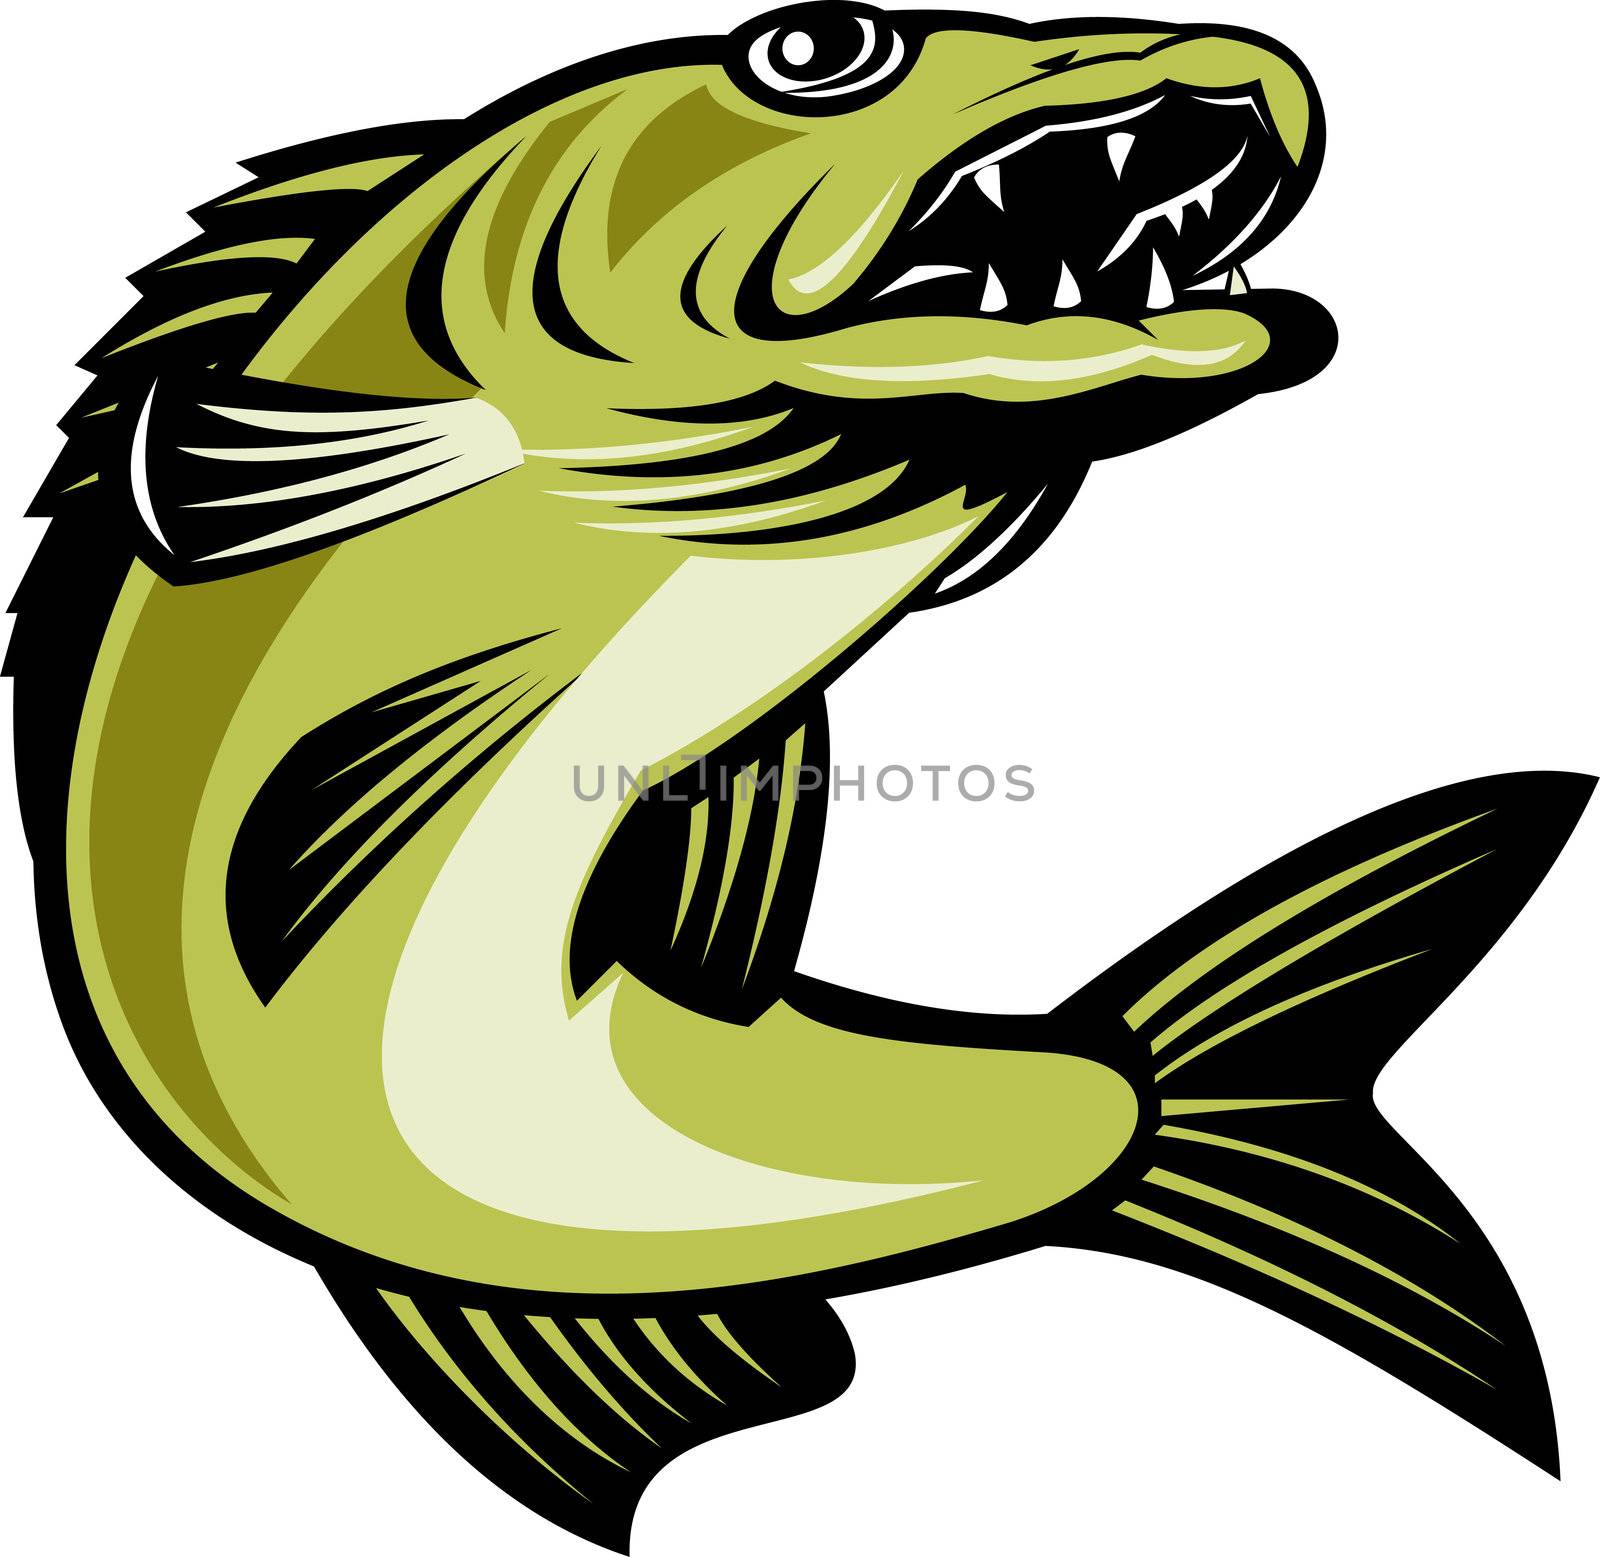 retro illustration of a walleye fish jumping isolated on white